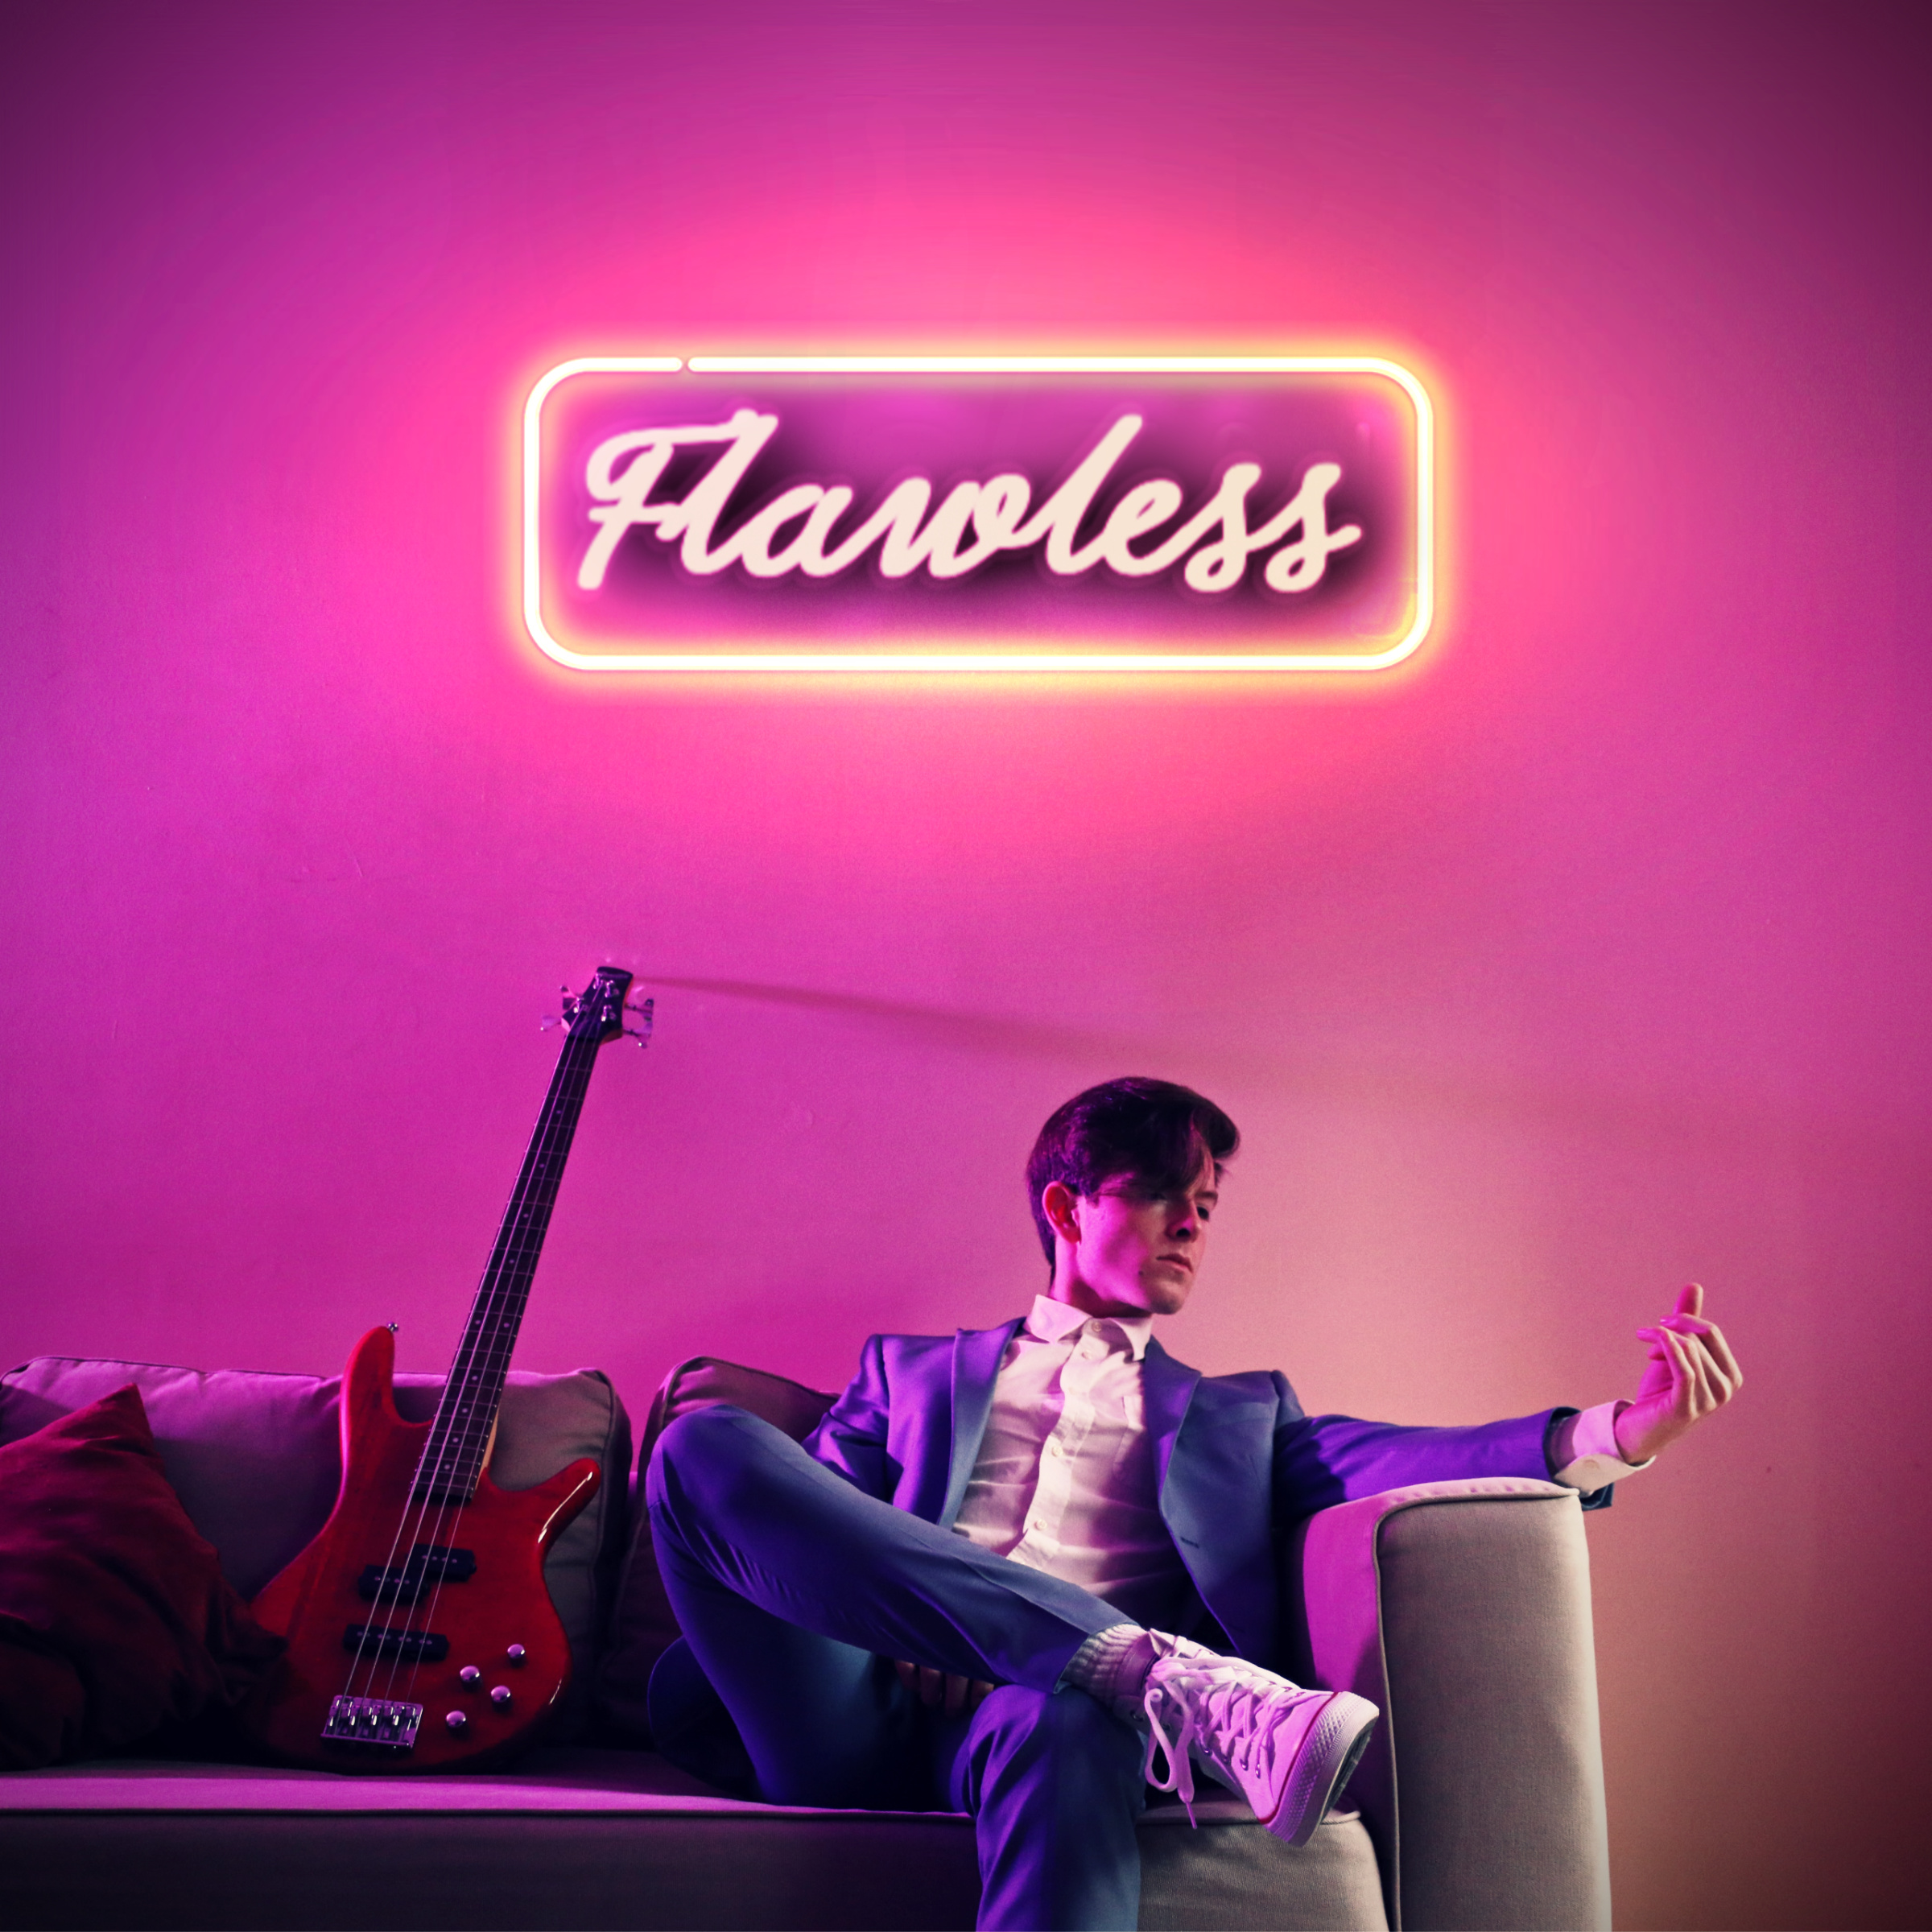 Pop Sensation Pipo Beats Set Releases His New Single “Flawless” And Announces The Official Music Video